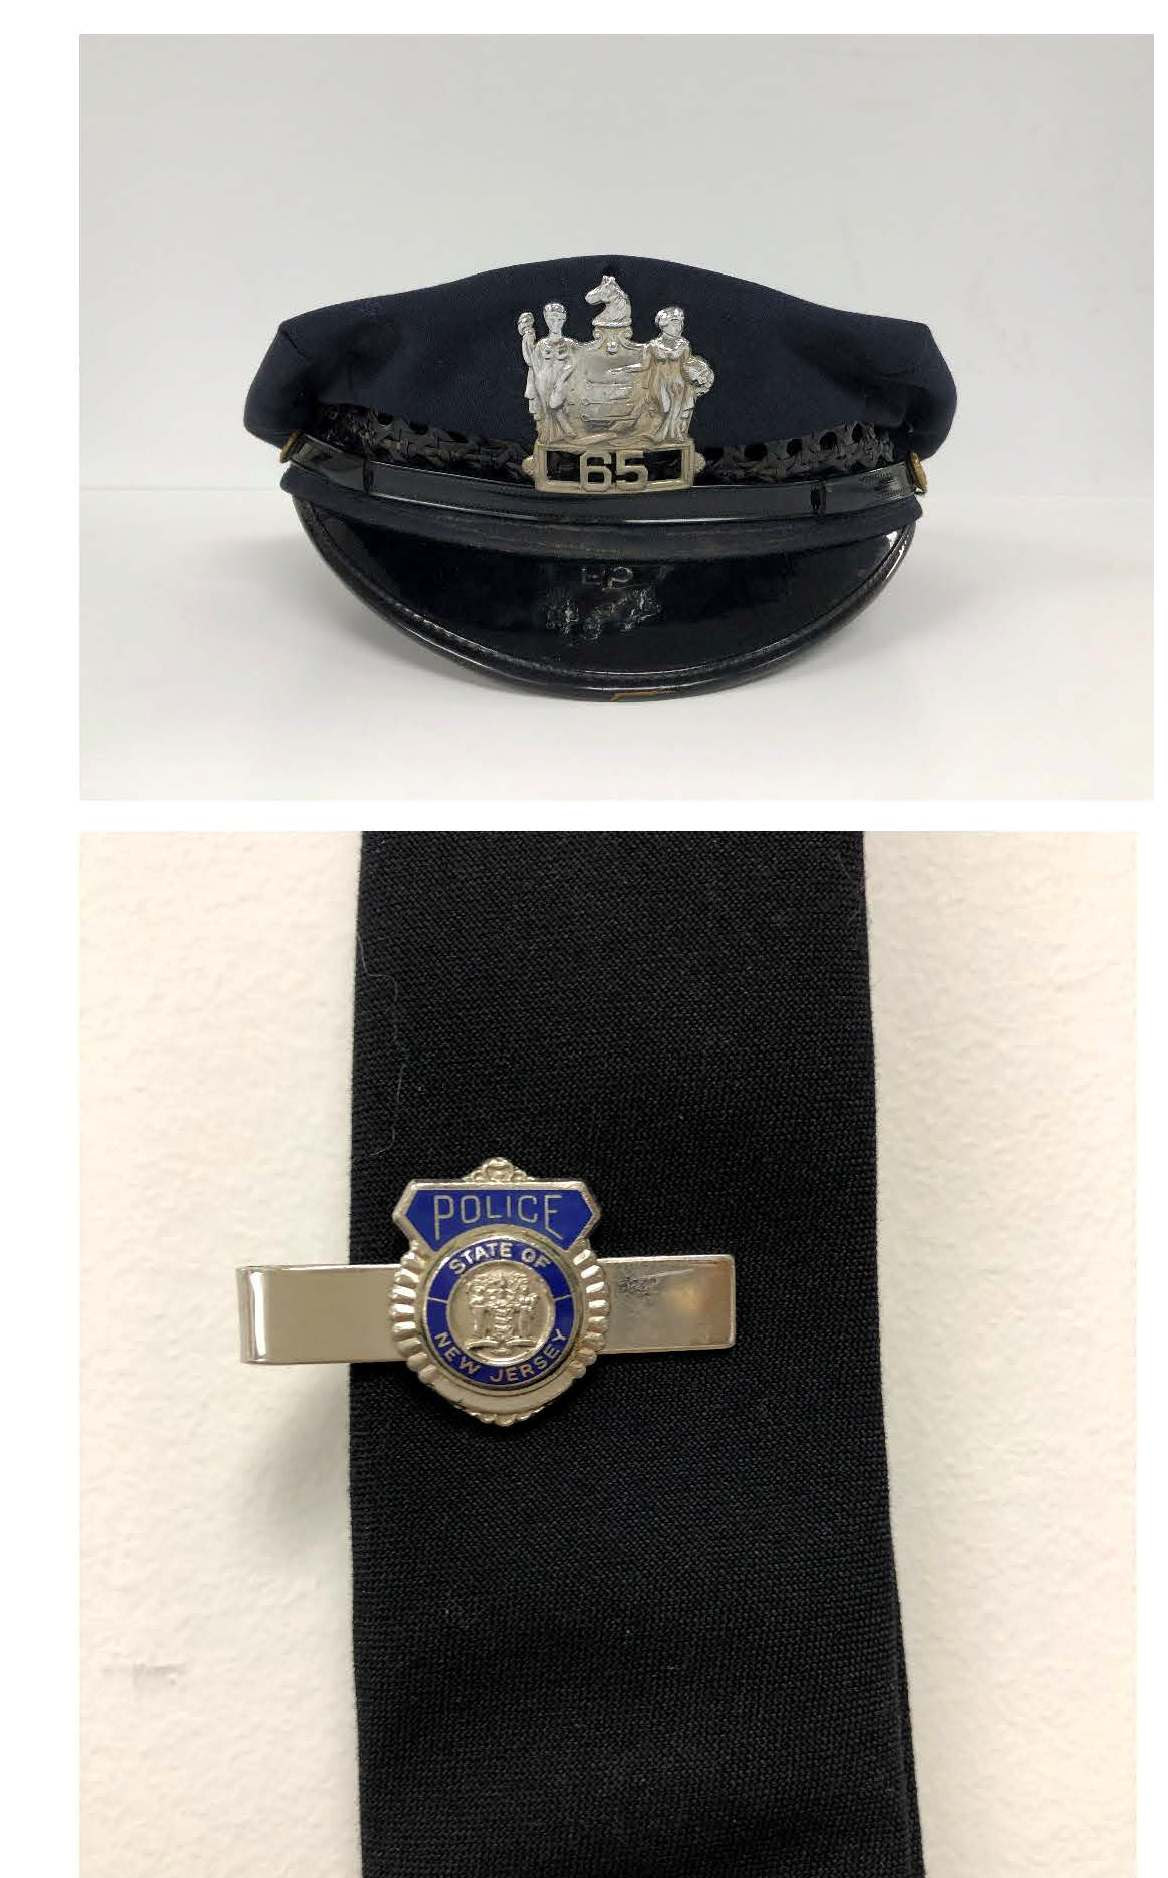 NJ Police Constable Hy Goldberg's cap, tie, and tie clip donated by Maxine and Jon Schein.